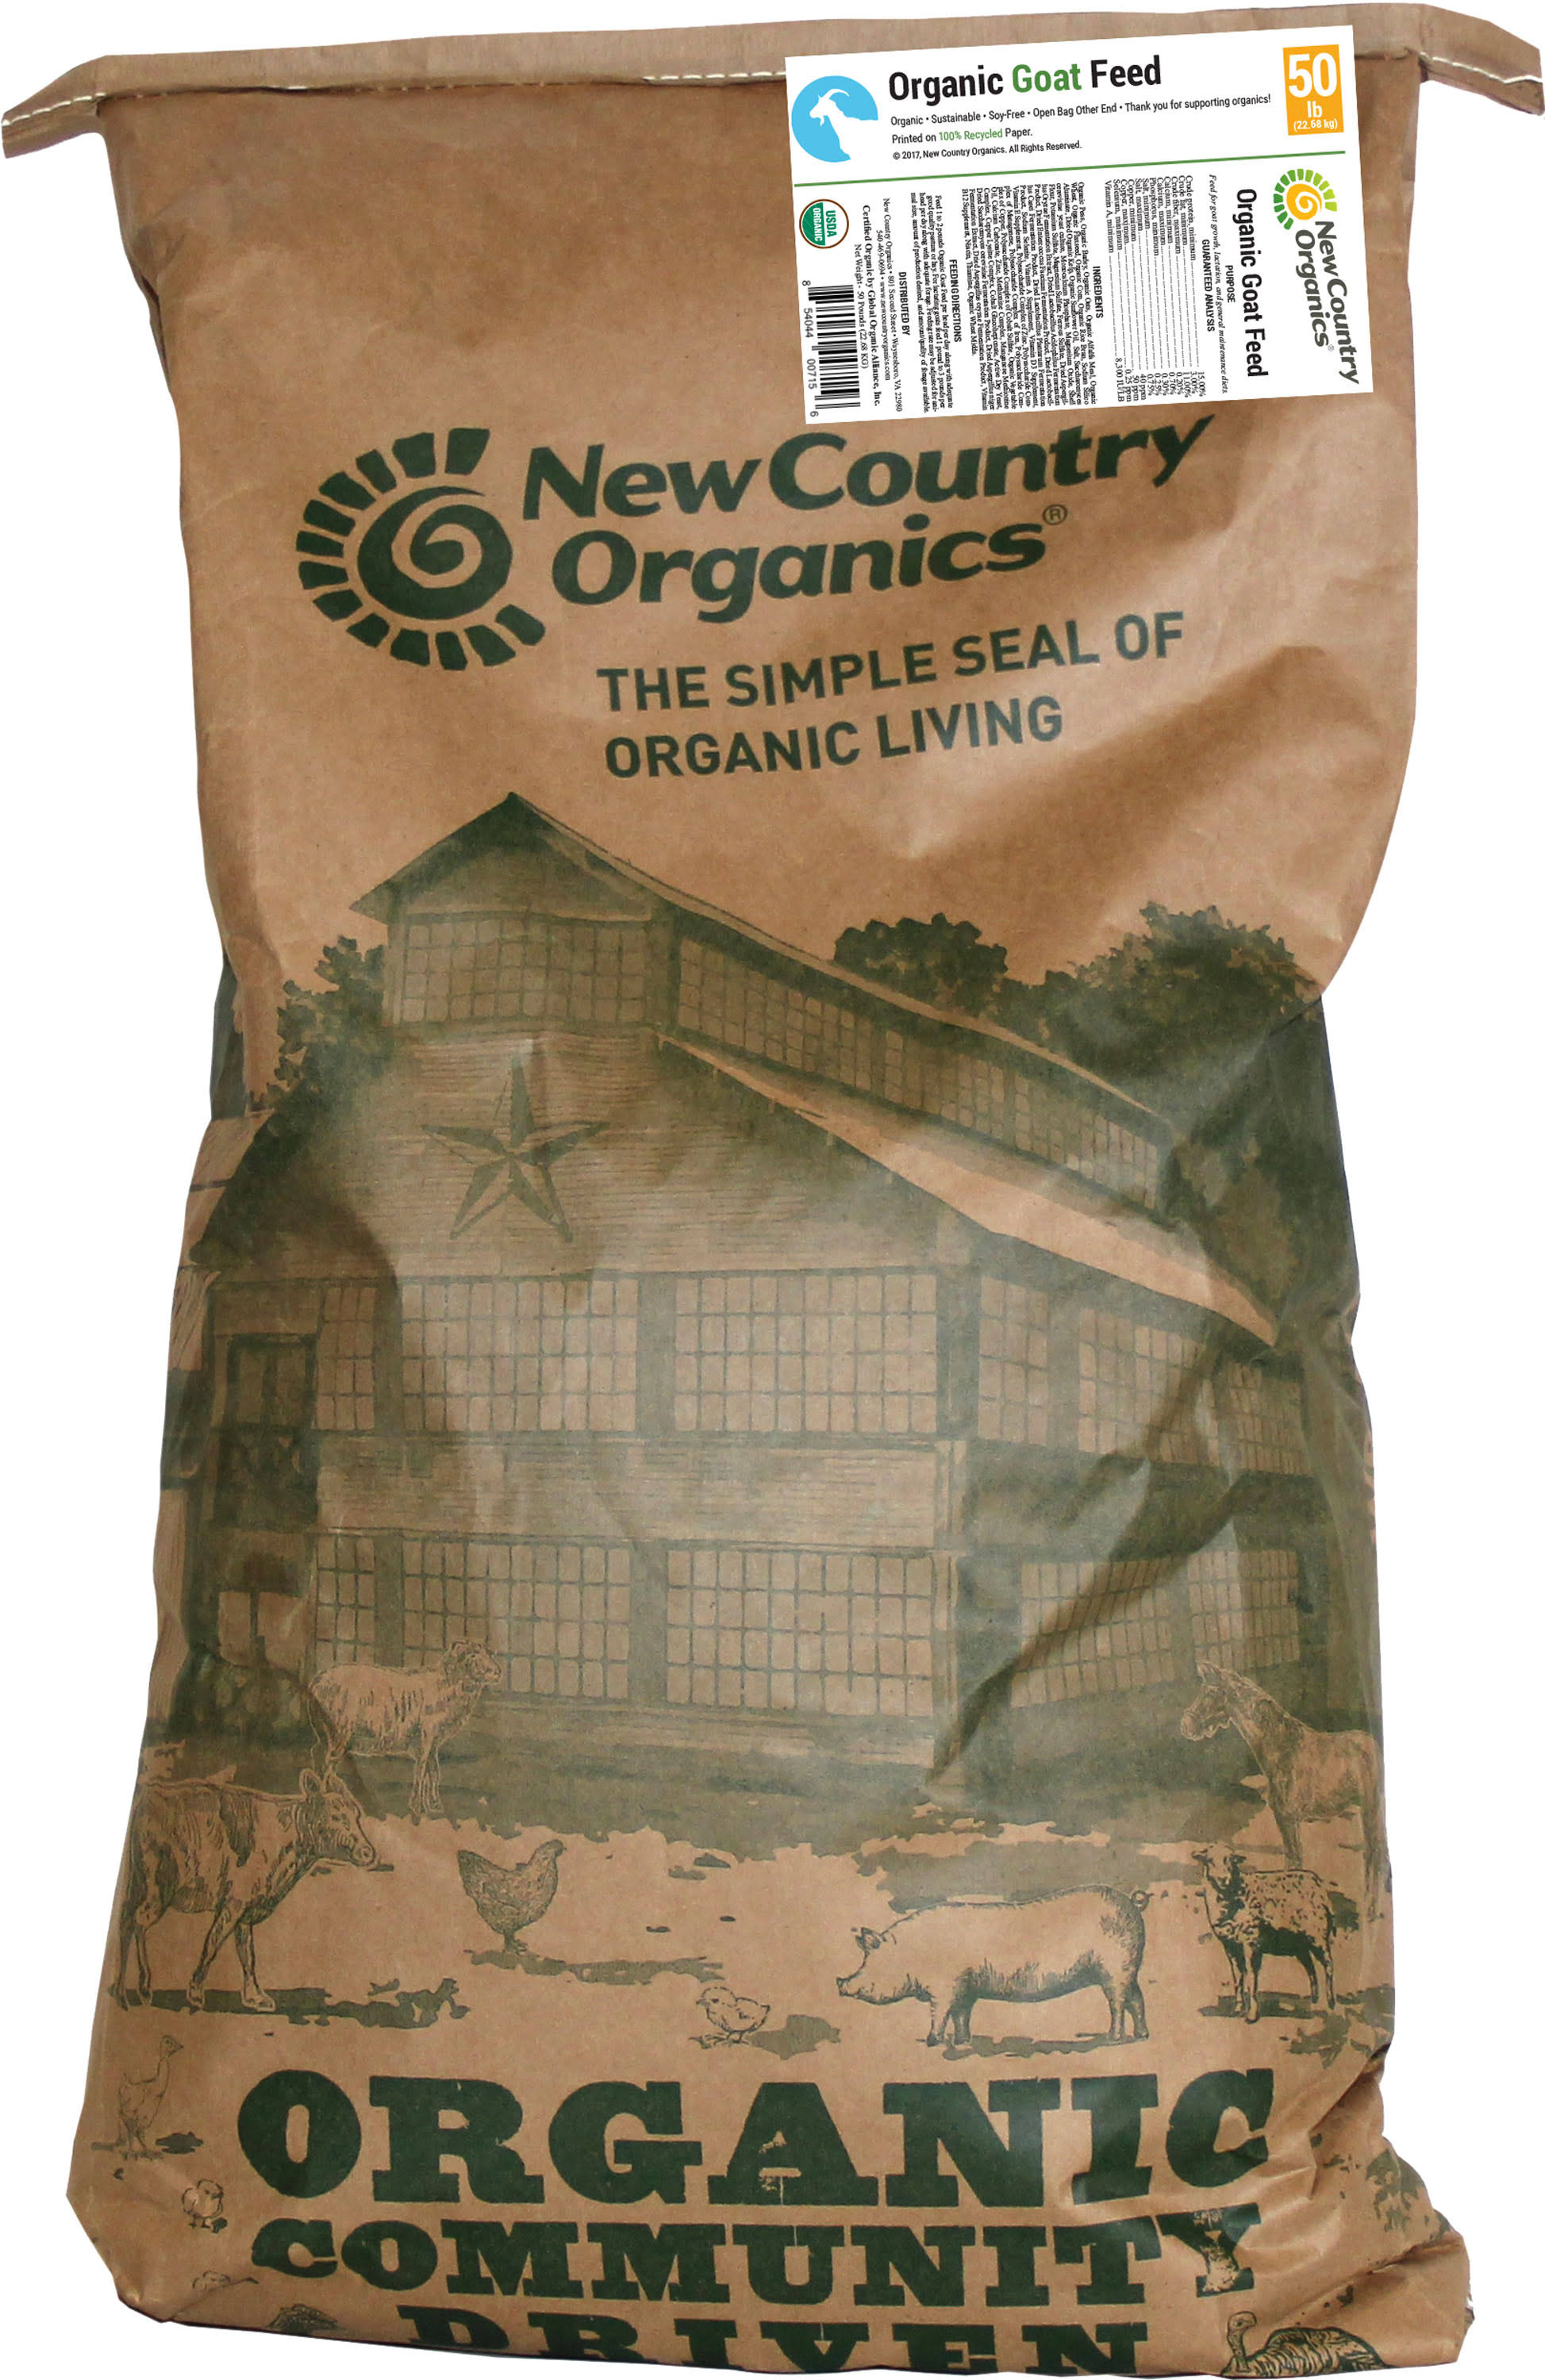 New Country Organics - Certified Organic Soy-Free Goat Feed 50 lb